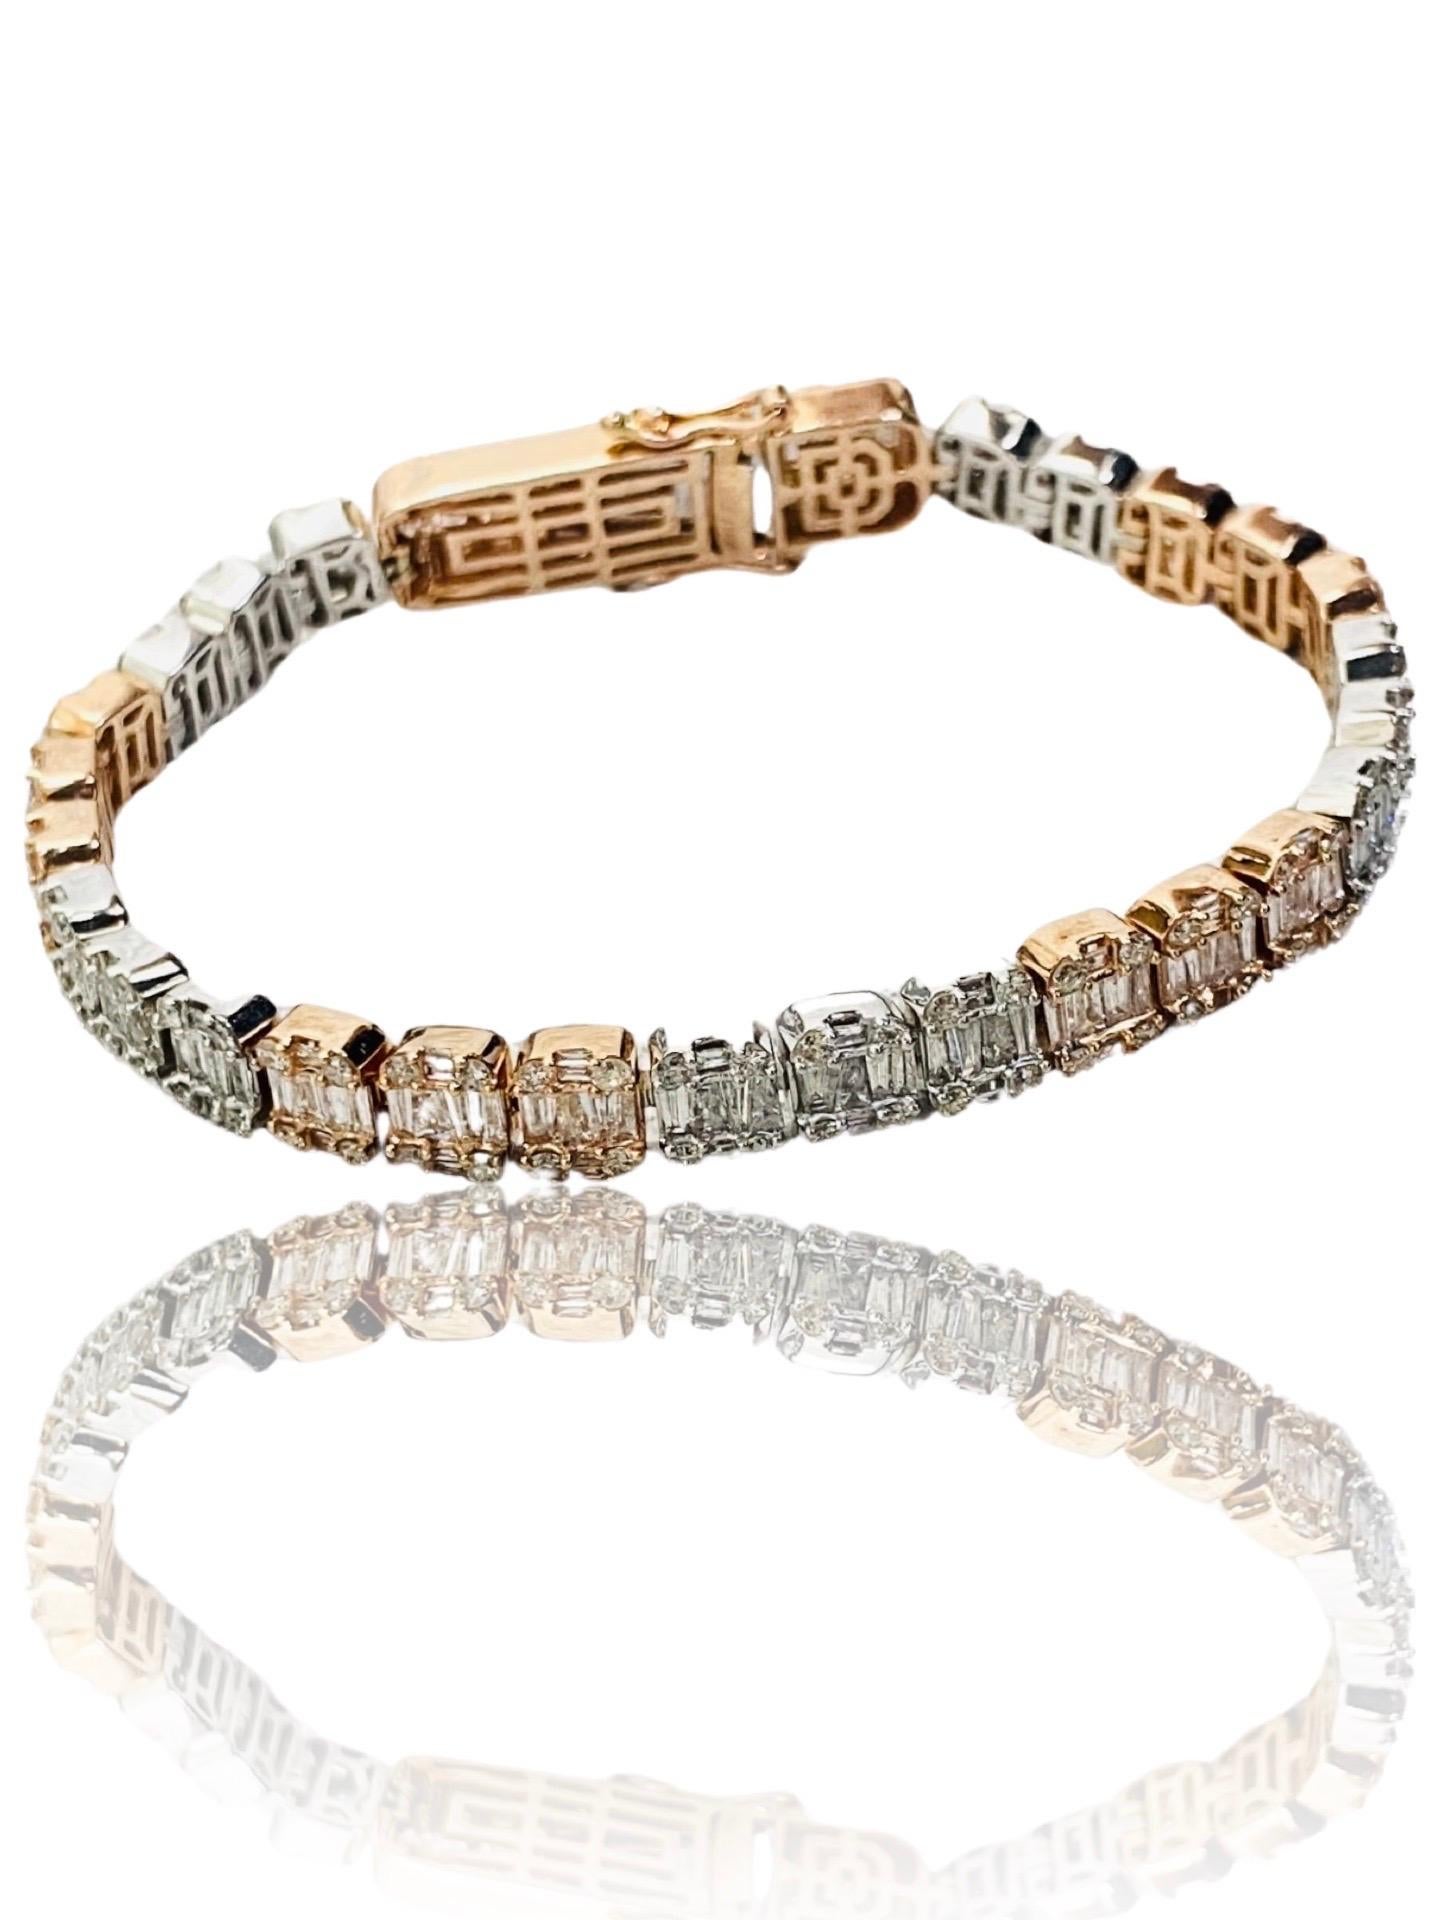 Two-Tone Gold 9.50 Carat Diamonds Tennis Baguette and Round Diamonds Bracelet. Very luxurious tennis bracelet with massive sparkling. The there are approx 6.50 carat of diamonds total weight (by formula). The bracelet measures 6.75mm width and 7